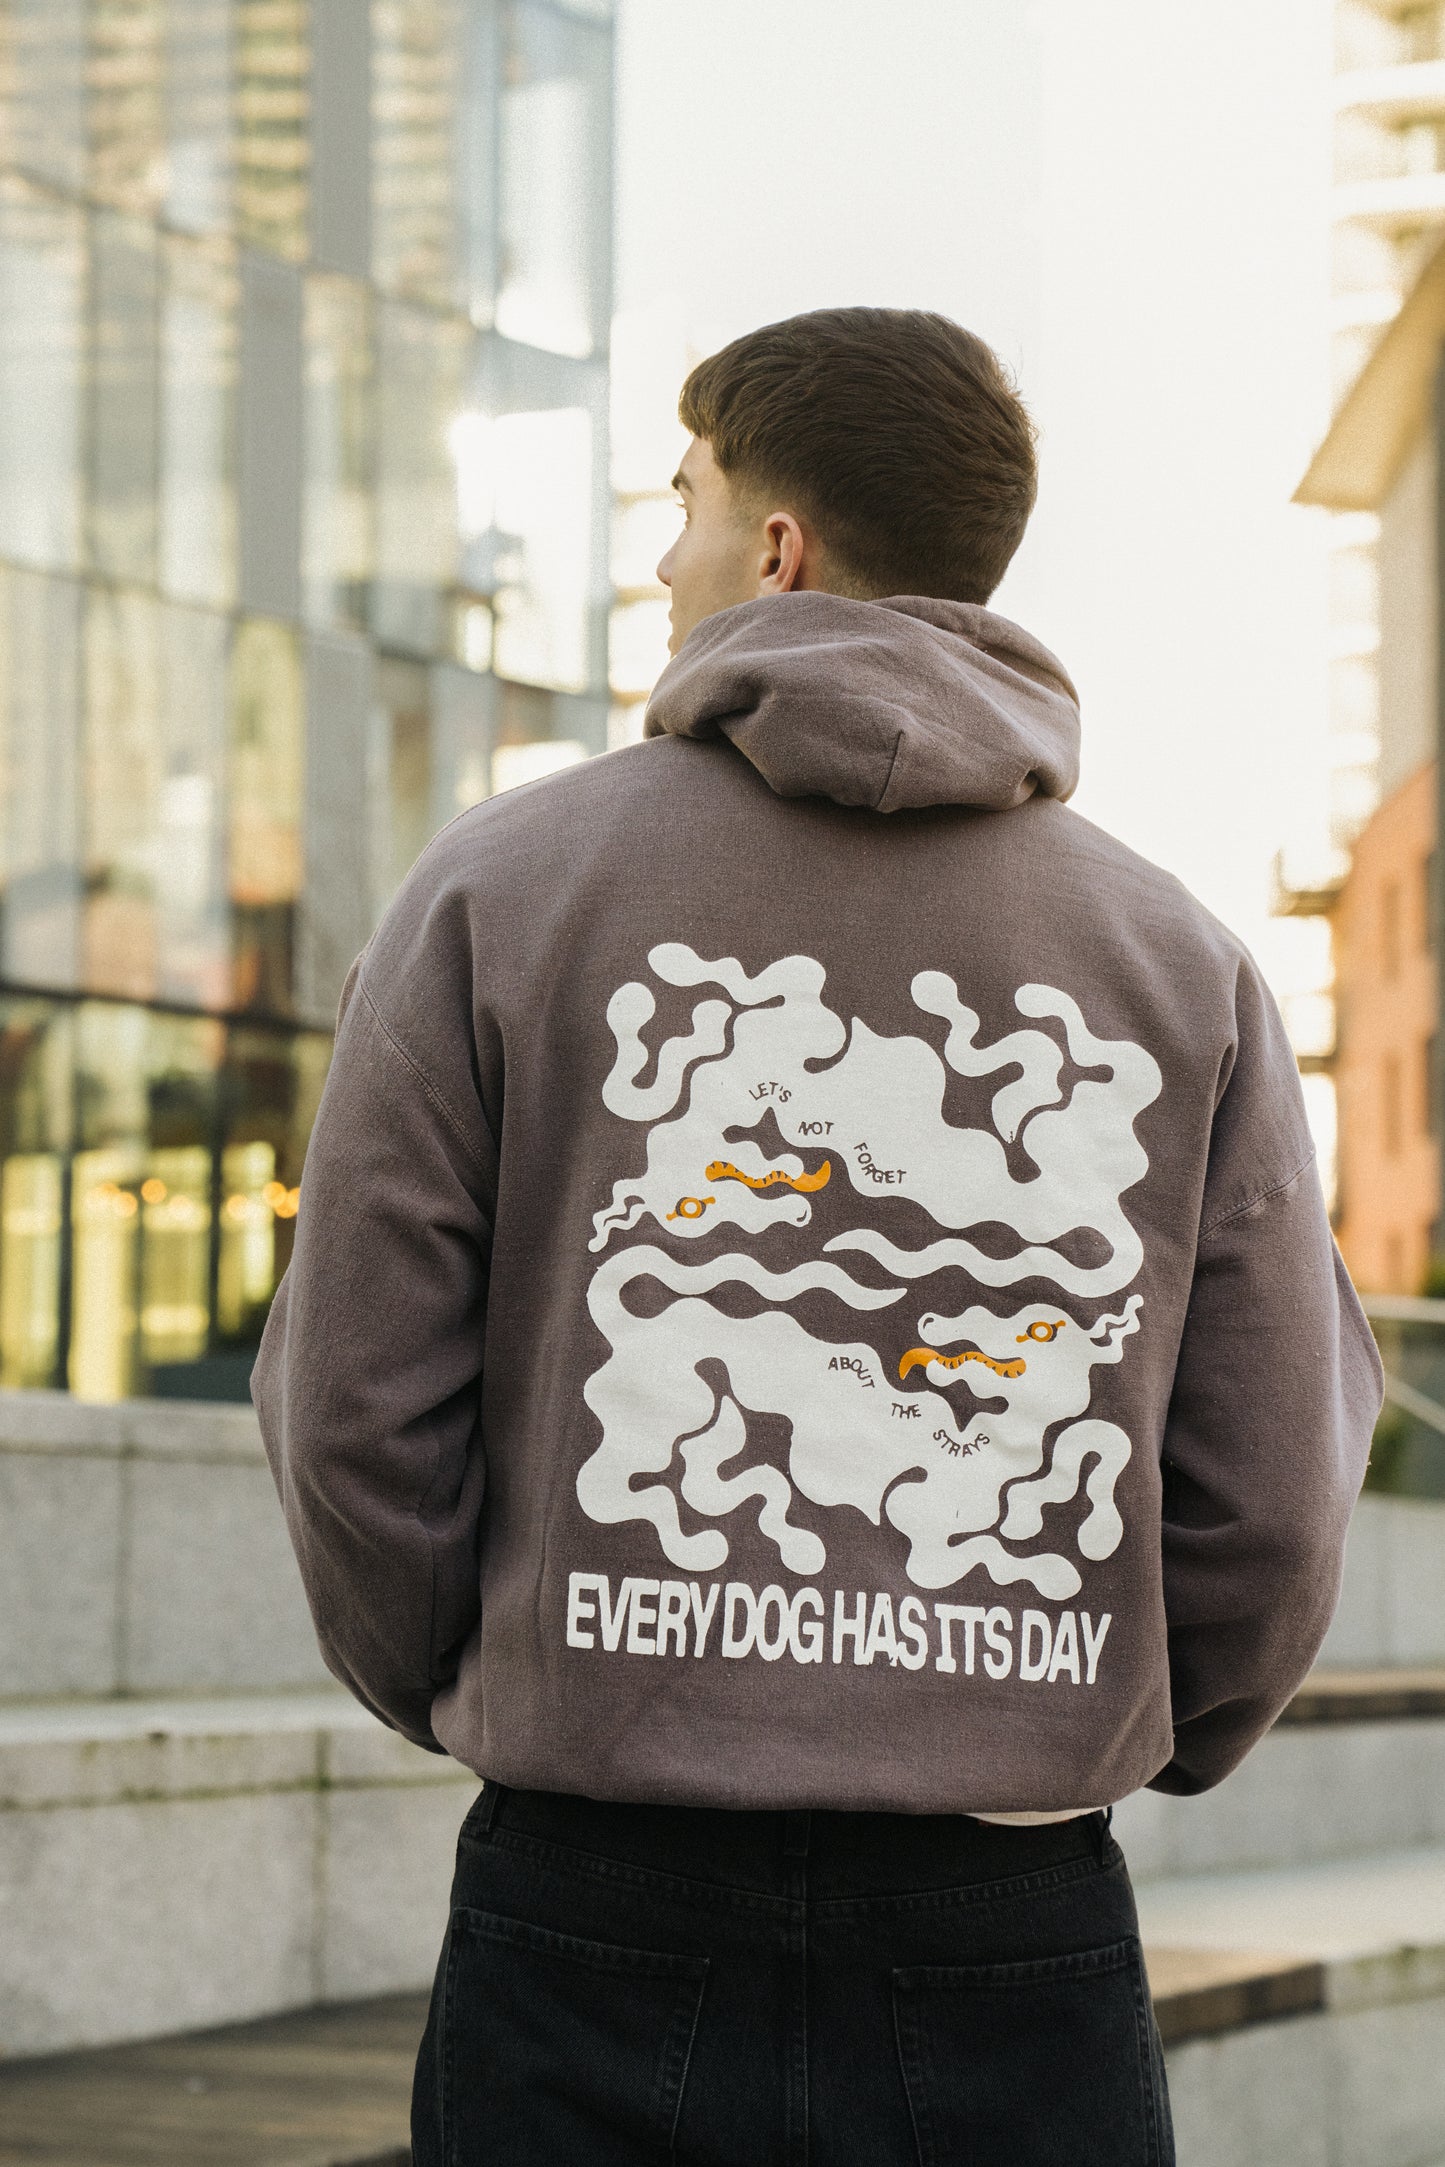 KBAR X UN:IK 'Every Dog Has Its Day' Vintage Washed Hoodie - Cocoa